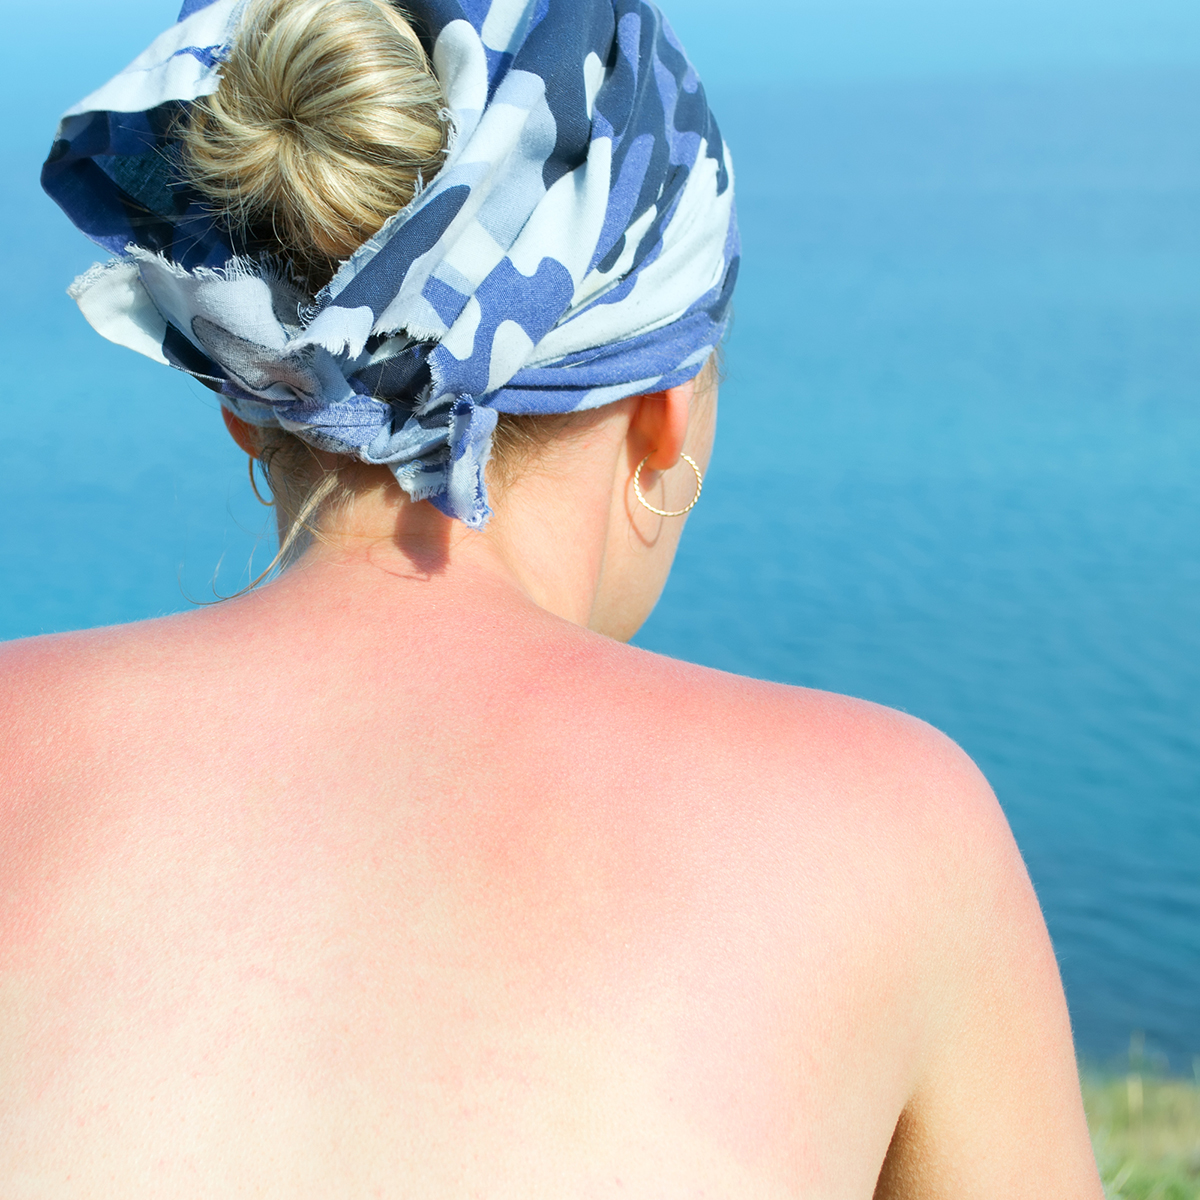 How to prevent sun damage and treatment for sun-damaged skin - Huntington NY Area